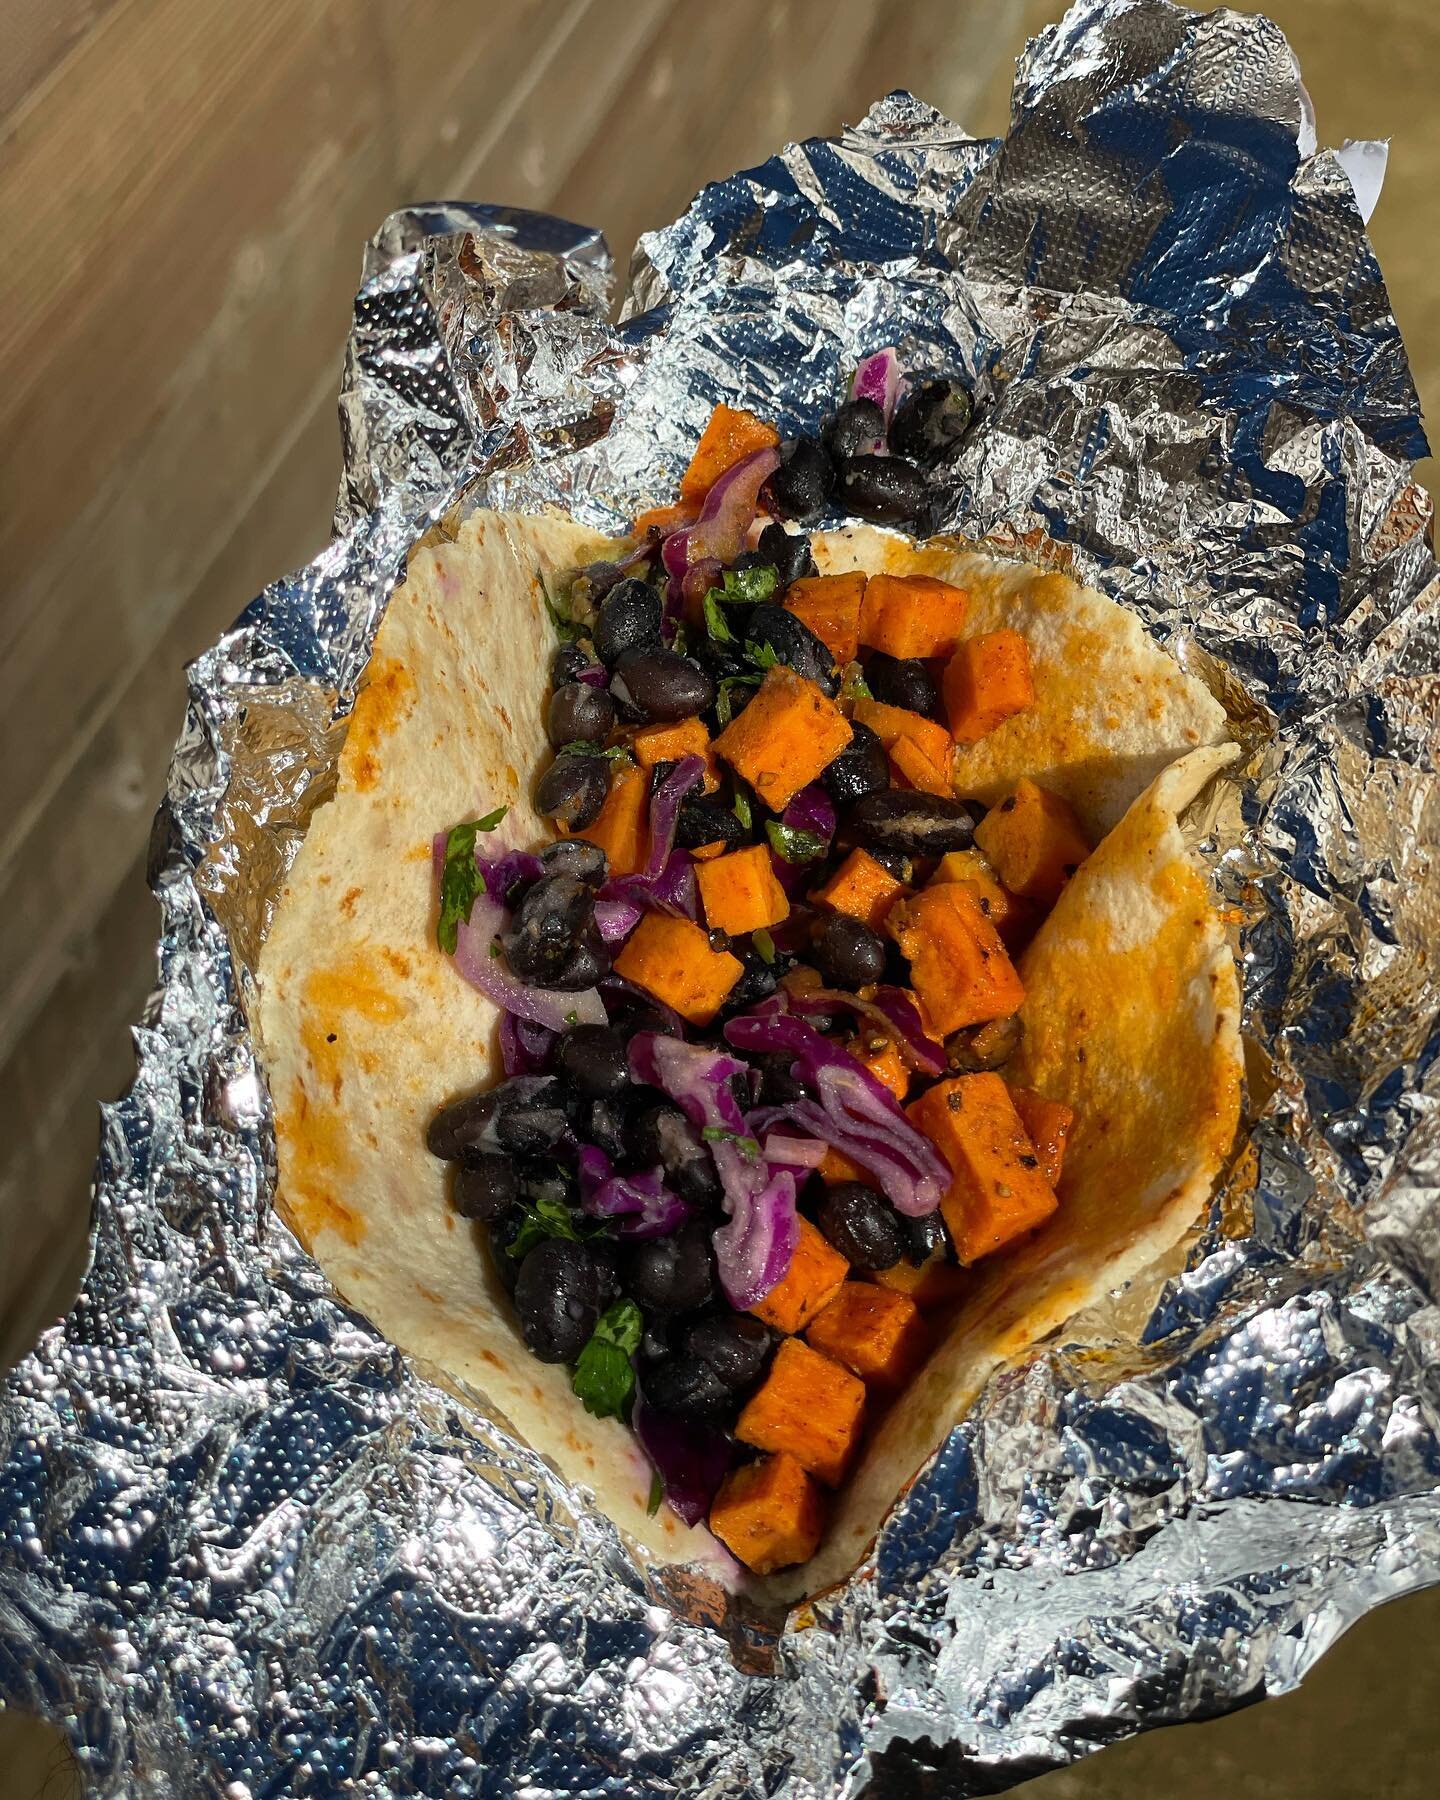 We&rsquo;re putting the finishing touches on our lunch menu. It&rsquo;s tasty and full of traditional and new taco combinations. This roasted sweet potato taco topped with purple cabbage &amp; black bean slaw and avocado is a serious sleeper. It&rsqu